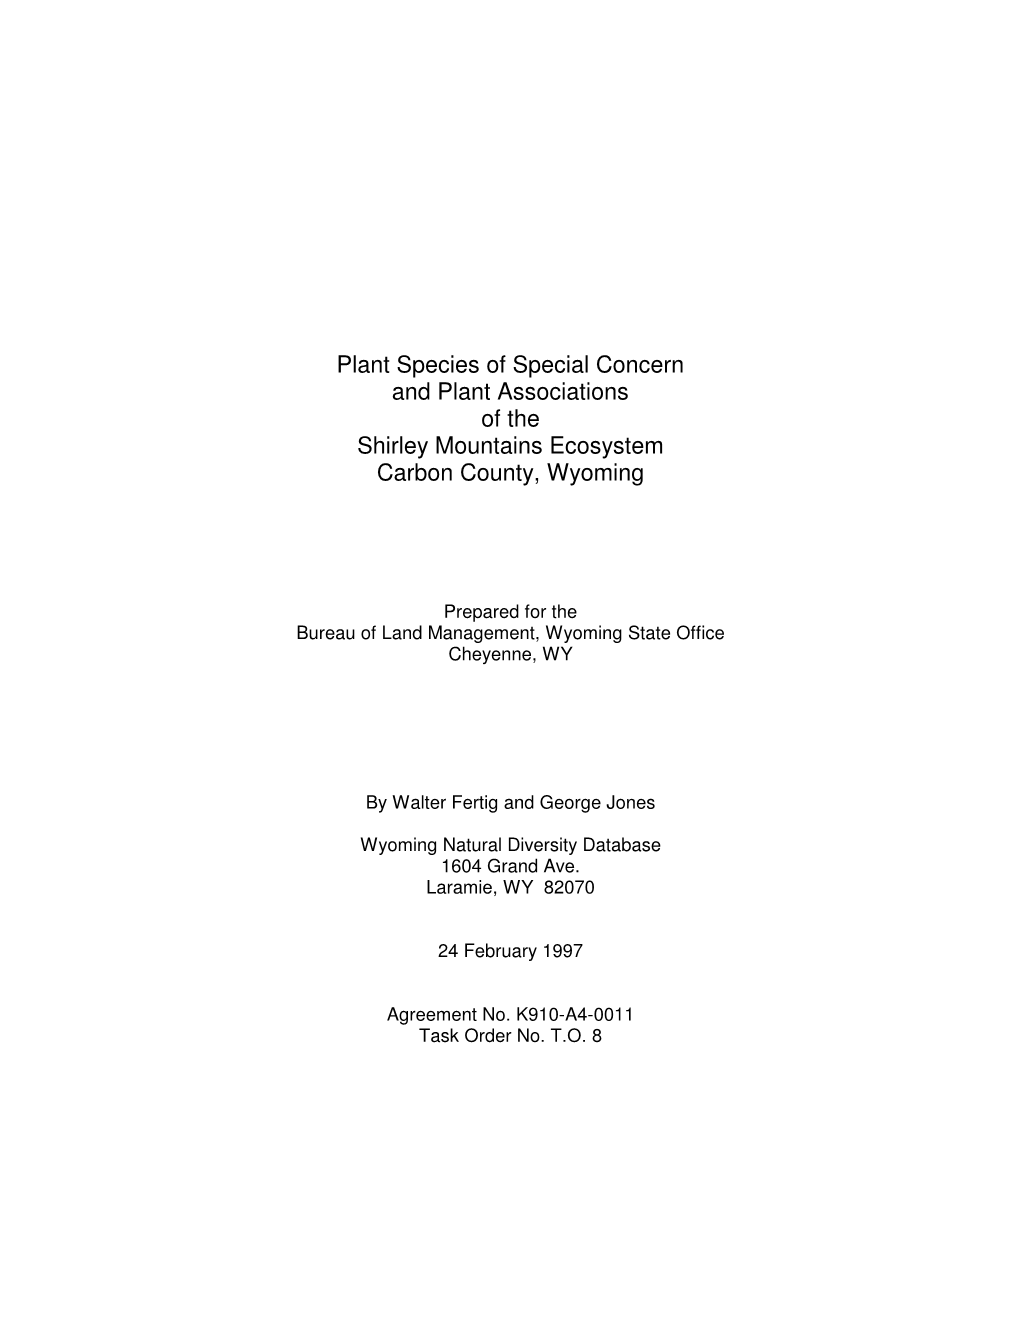 Plant Species of Special Concern and Plant Associations of the Shirley Mountains Ecosystem Carbon County, Wyoming